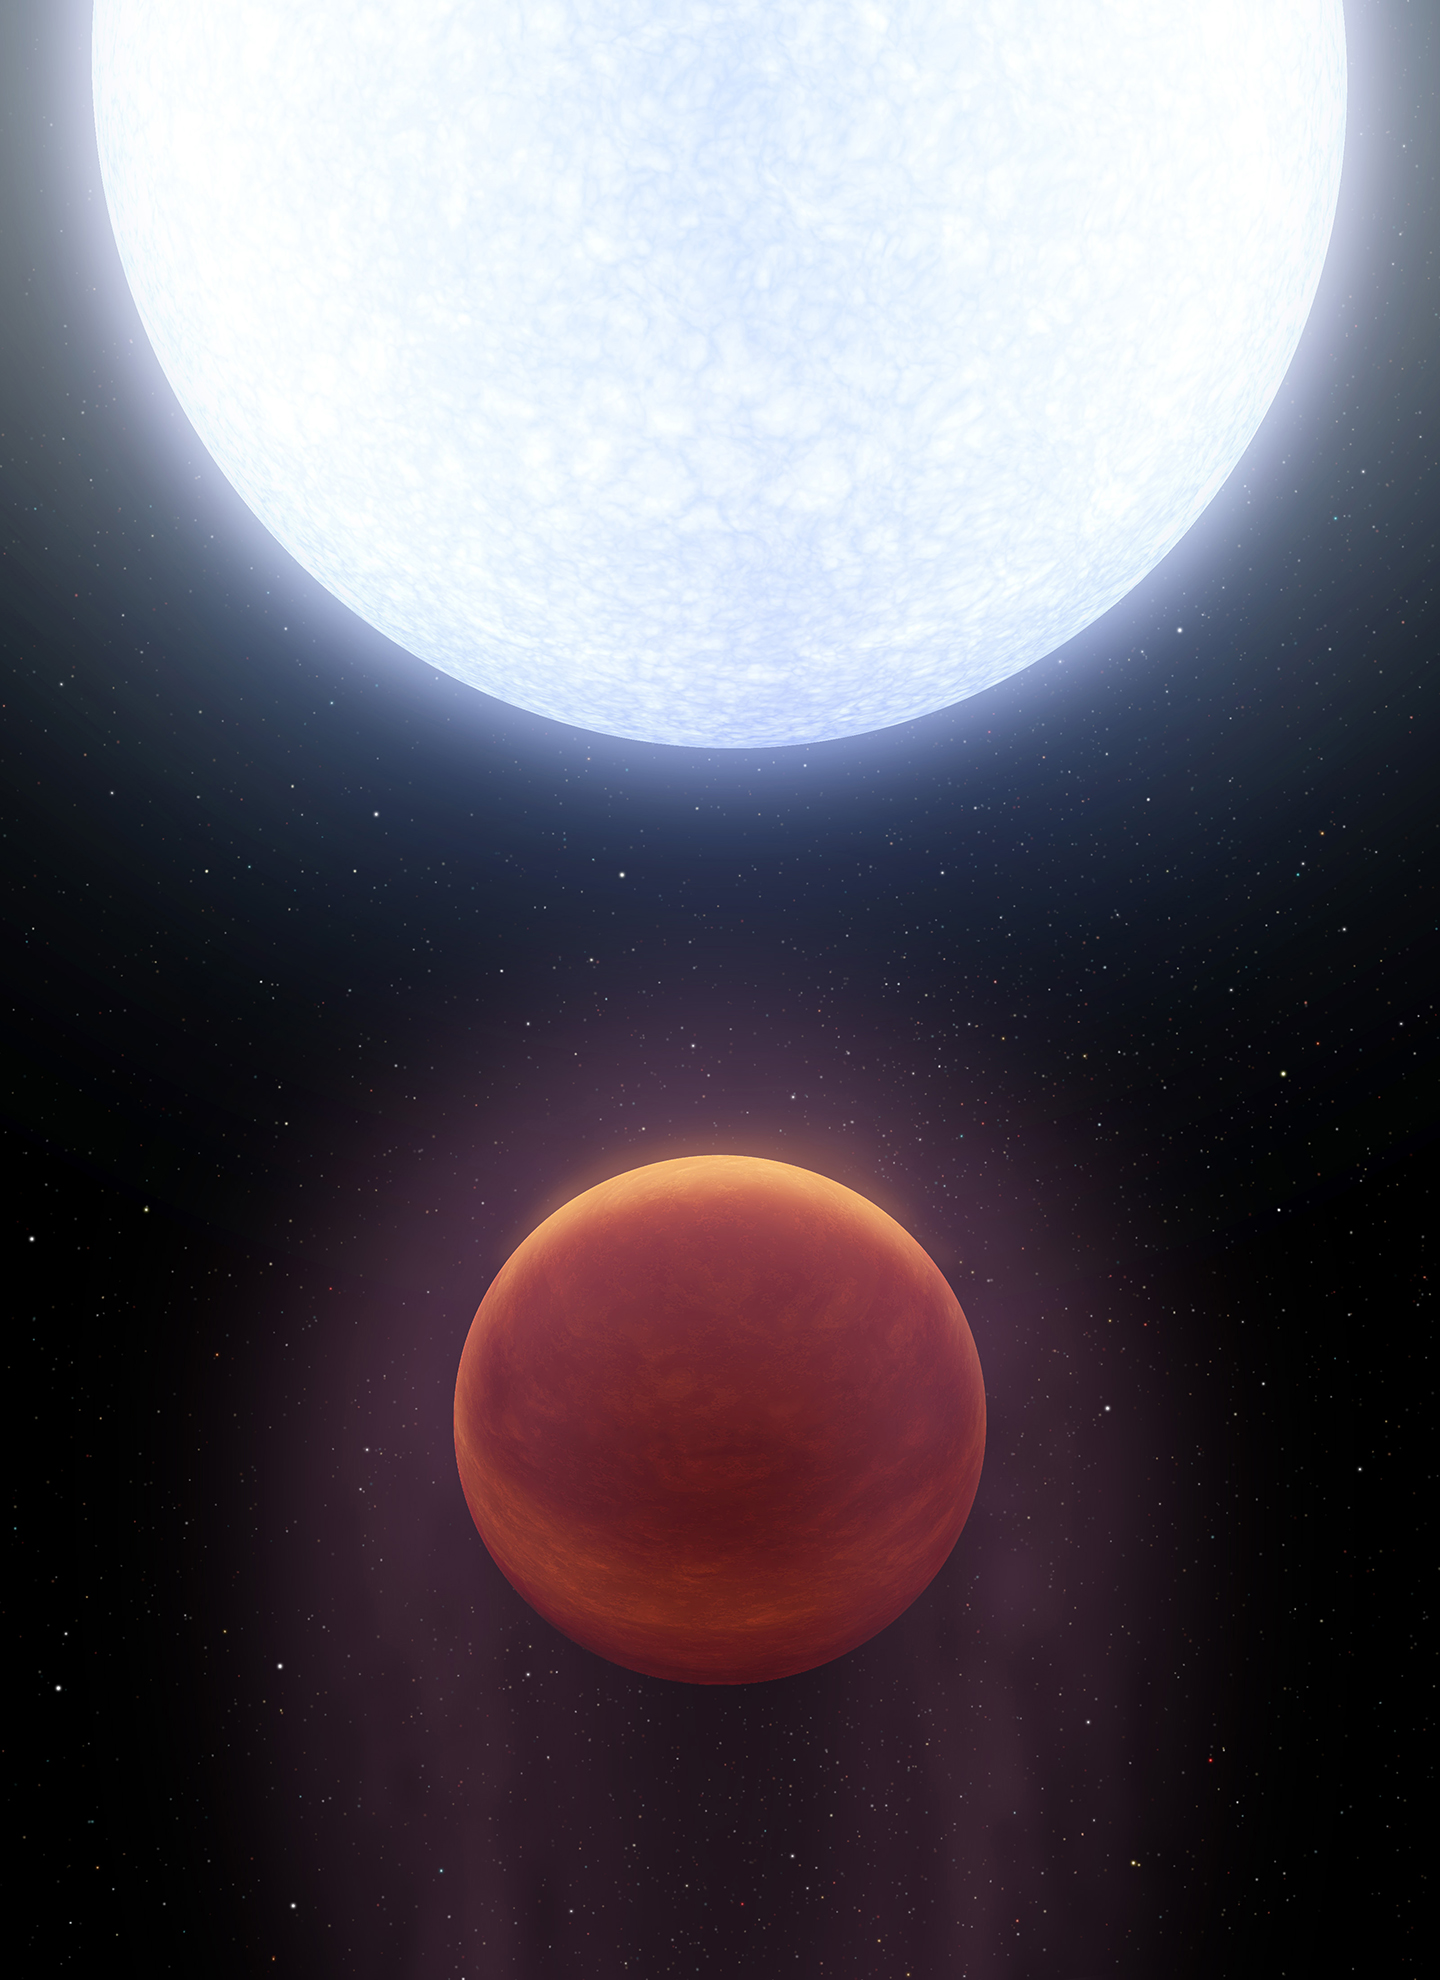 Artist's conception showing the scorching-hot planet KELT-9b orbiting its host star. A newly detected signal may indicate the presence of a similar planet orbiting the star Vega. The discovery of KELT-9b also included major contributions from CfA scientists.